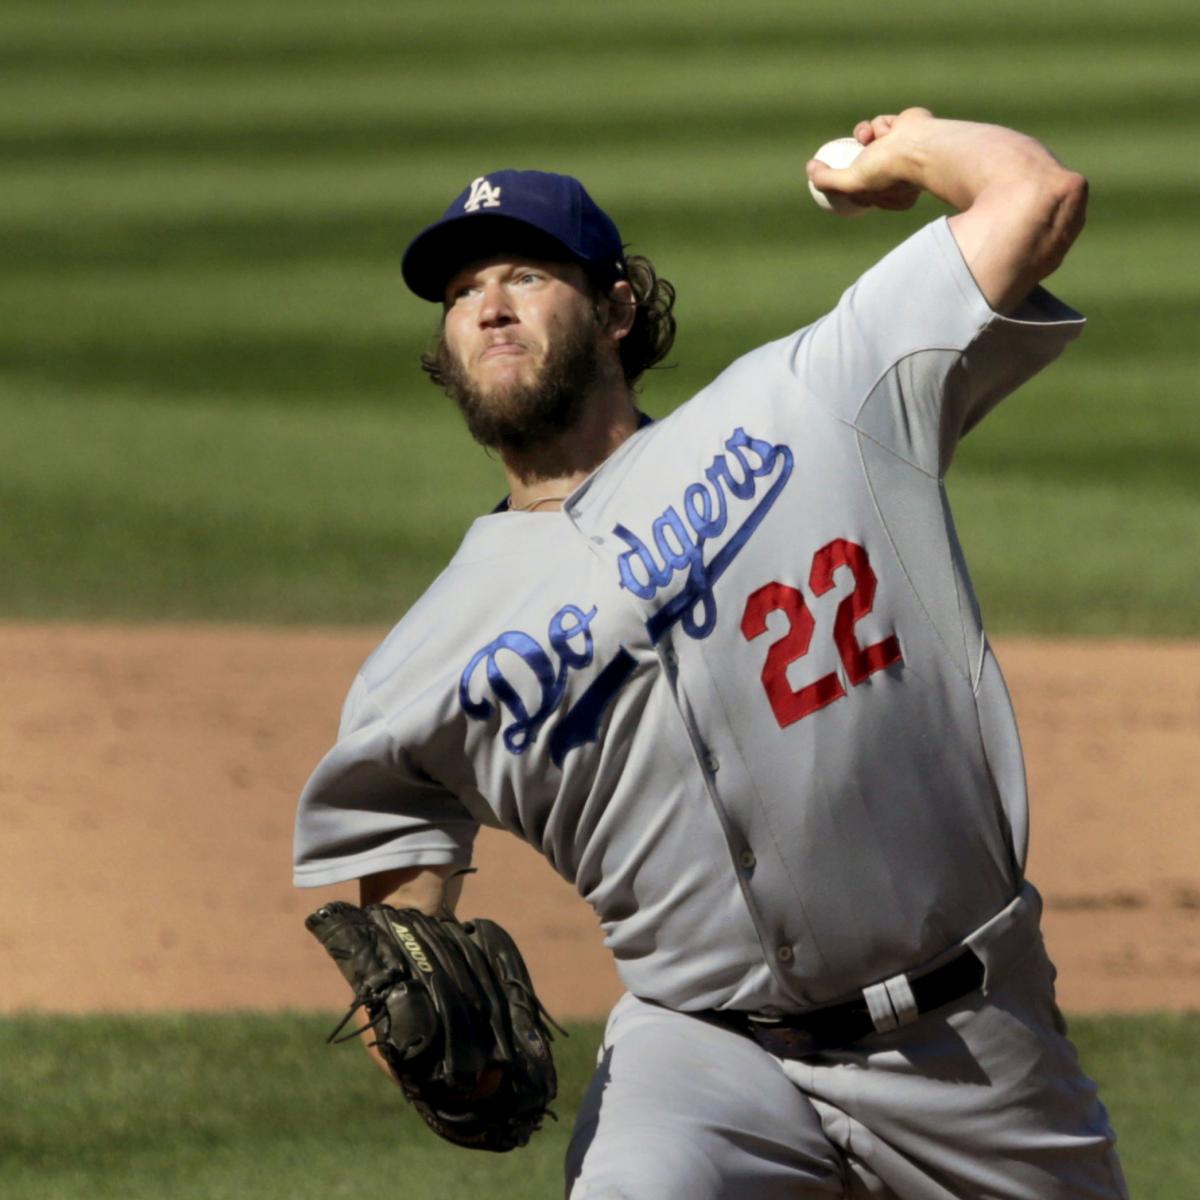 Clayton Kershaw Earns 20th Win with 145 Victory over Chicago Cubs